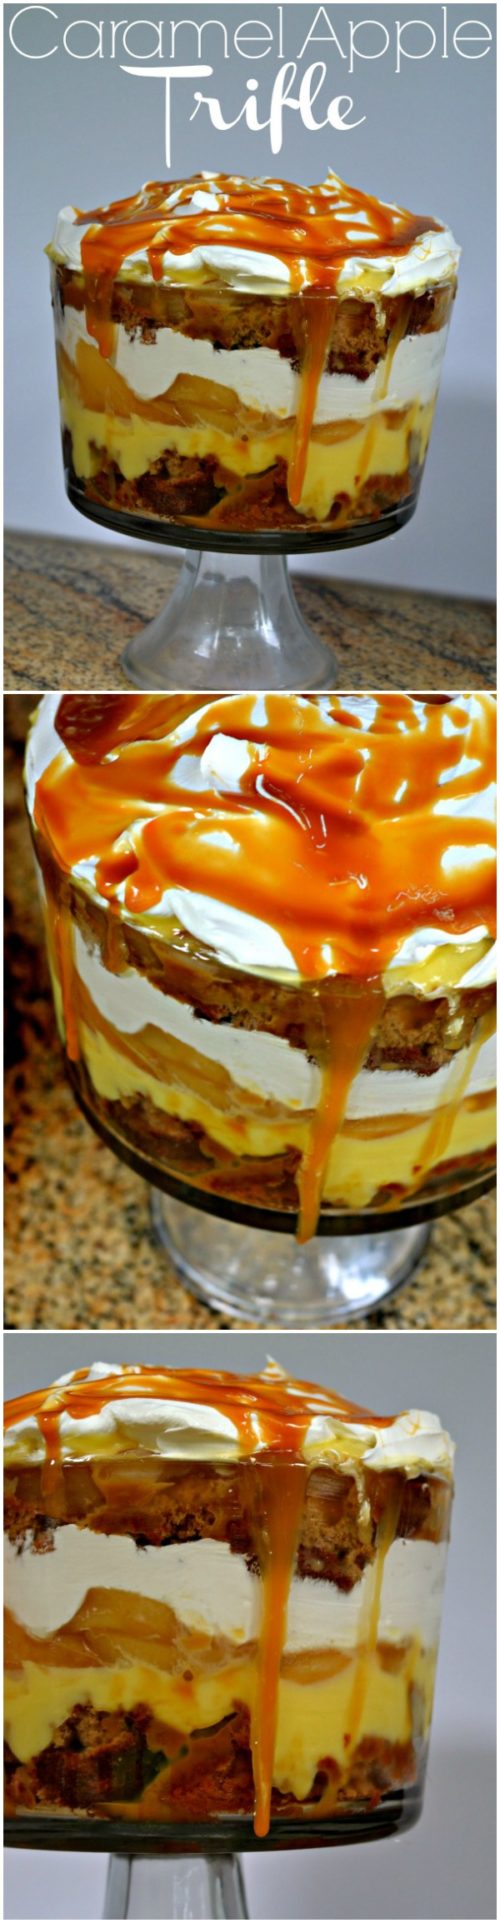 Easy Caramel Apple Trifle collage